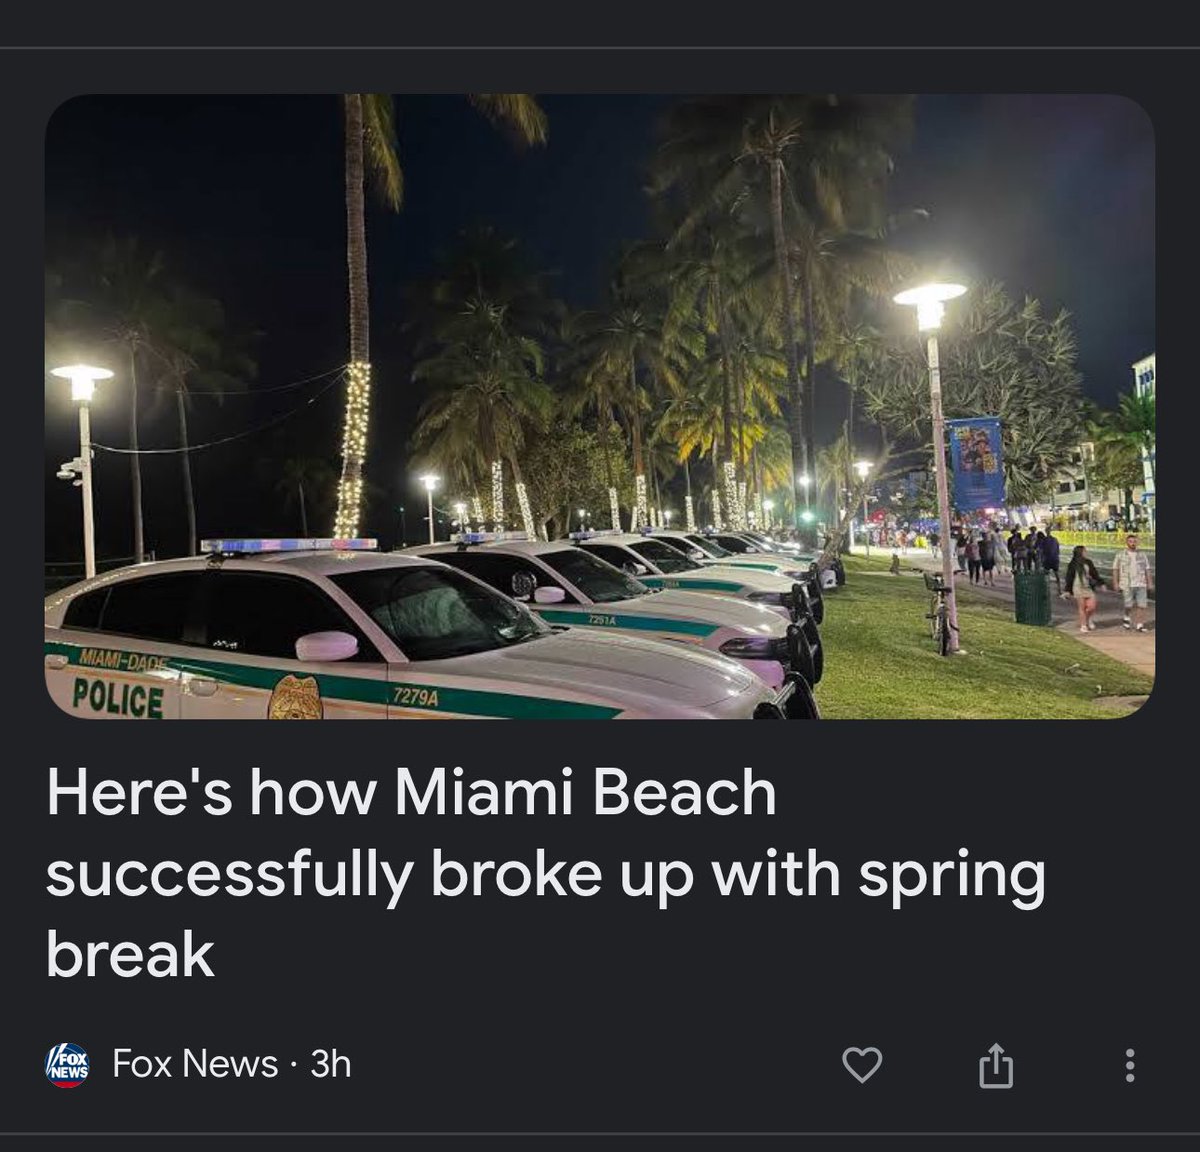 The same thing happened to me way back in #SpringBreak #80s in #FortLauderdale #florida now I’m a #seniorcitizen and looking at this new generation doing what we did back in the days. What amazing memories, a word to the new #springbreak have fun and be safe.